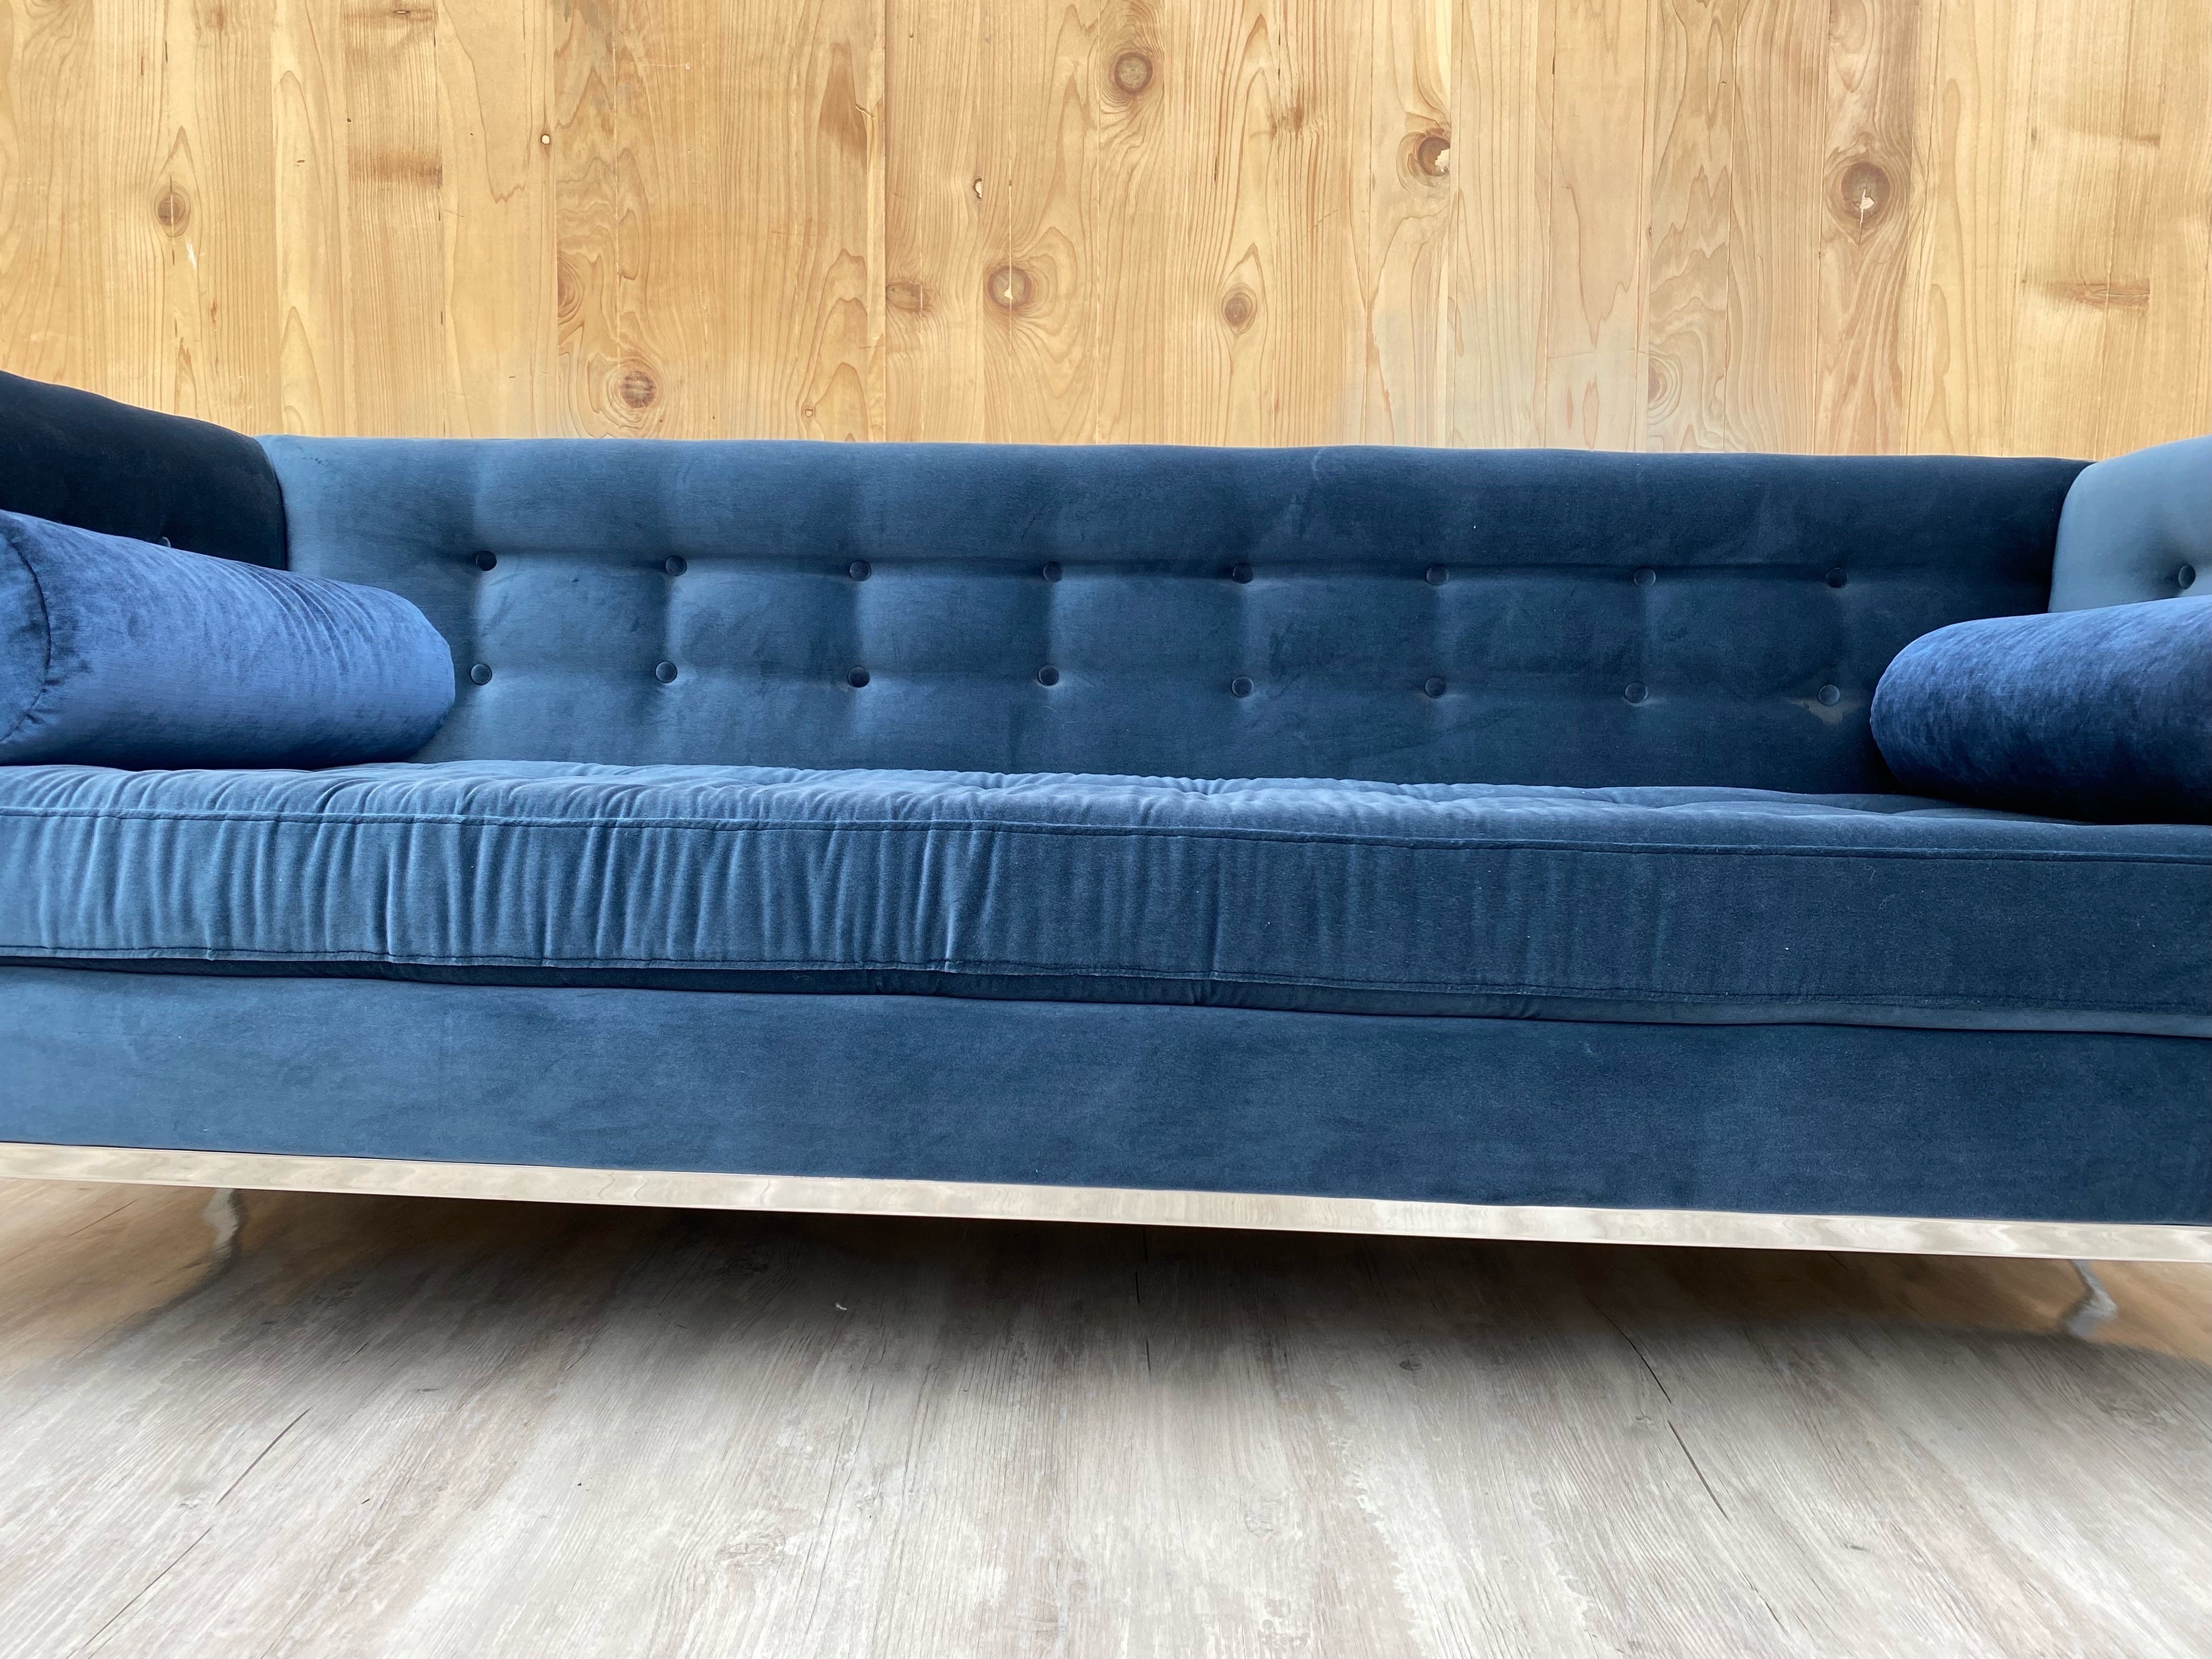 Mid Century Modern Florence Knoll Chrome Base Sofa Newly Upholstered in a Blue Velvet 

Beautiful MCM Florence Knoll Sofa made in the Style of Jonathan Adler's Lampert Sofa. The sofa has been newly reupholstered in a high end plush blue Egyptian